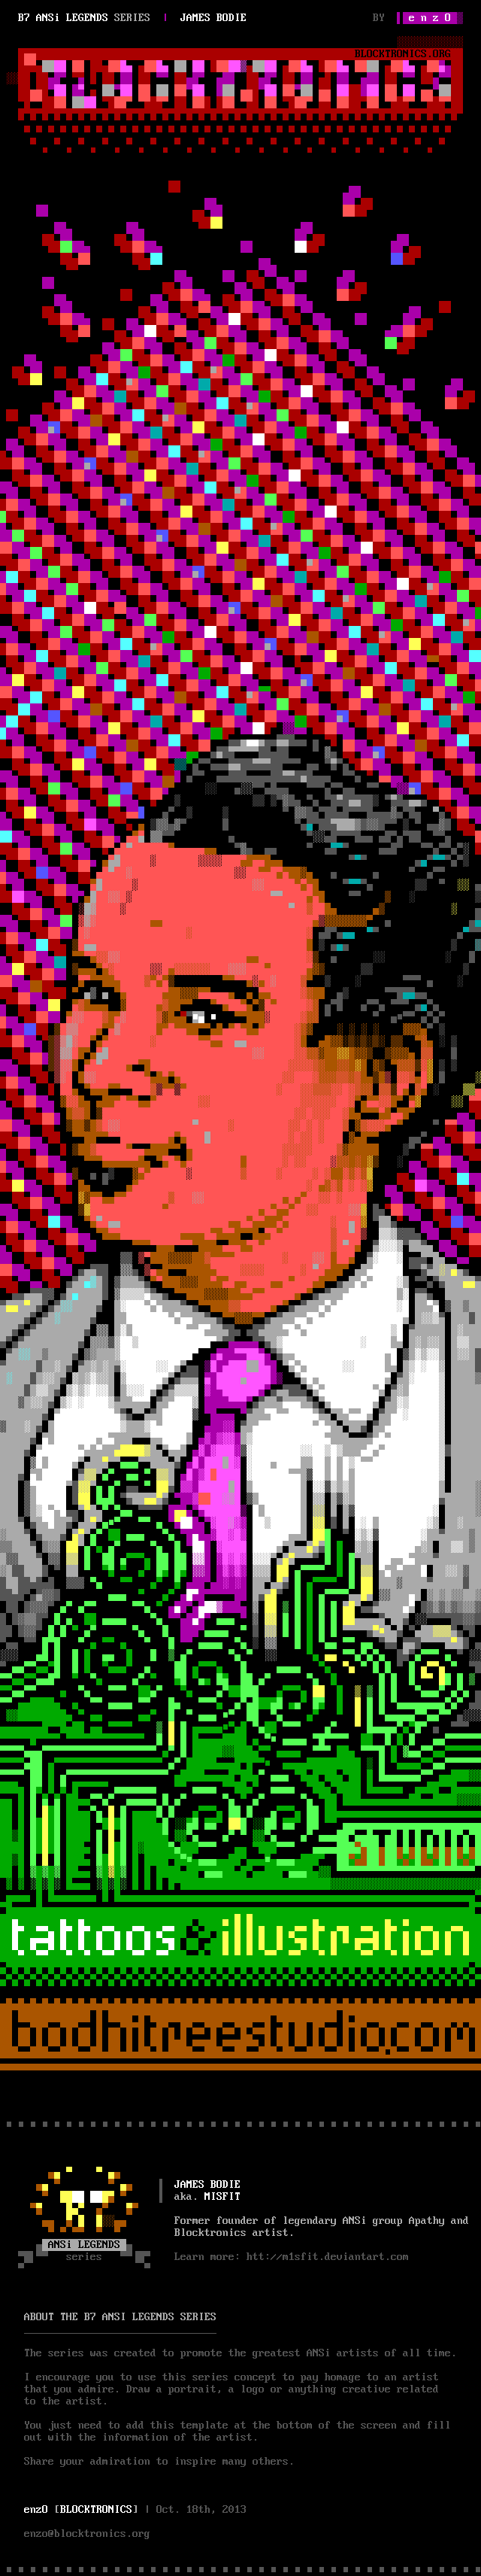 ANSi Legends: James Bodie by Enzo